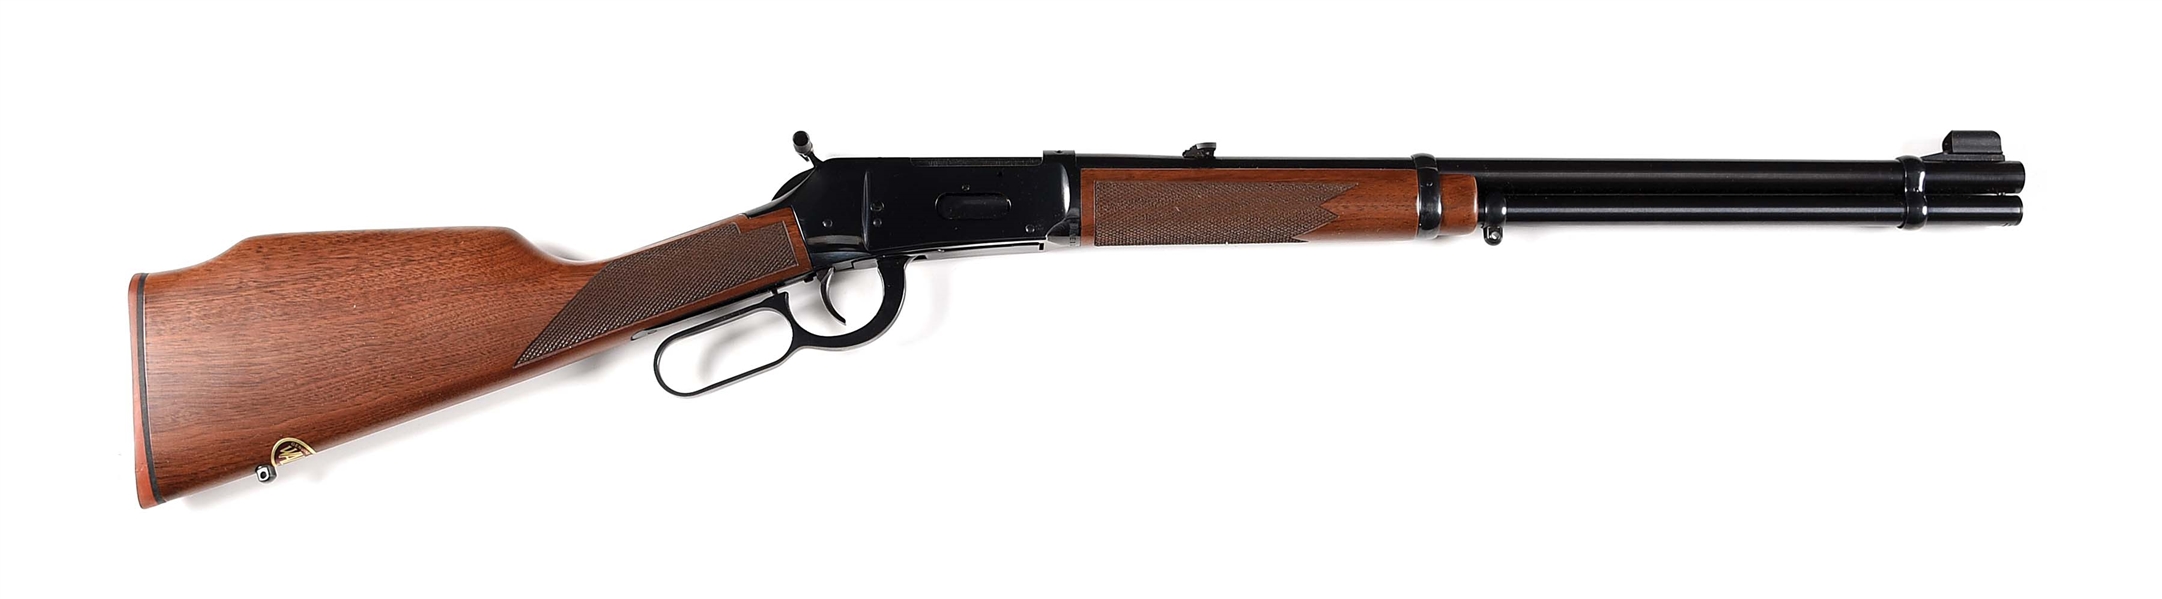 (M) WINCHESTER MODEL 1894 ANGLE EJECT BIG BORE LEVER ACTION RIFLE.